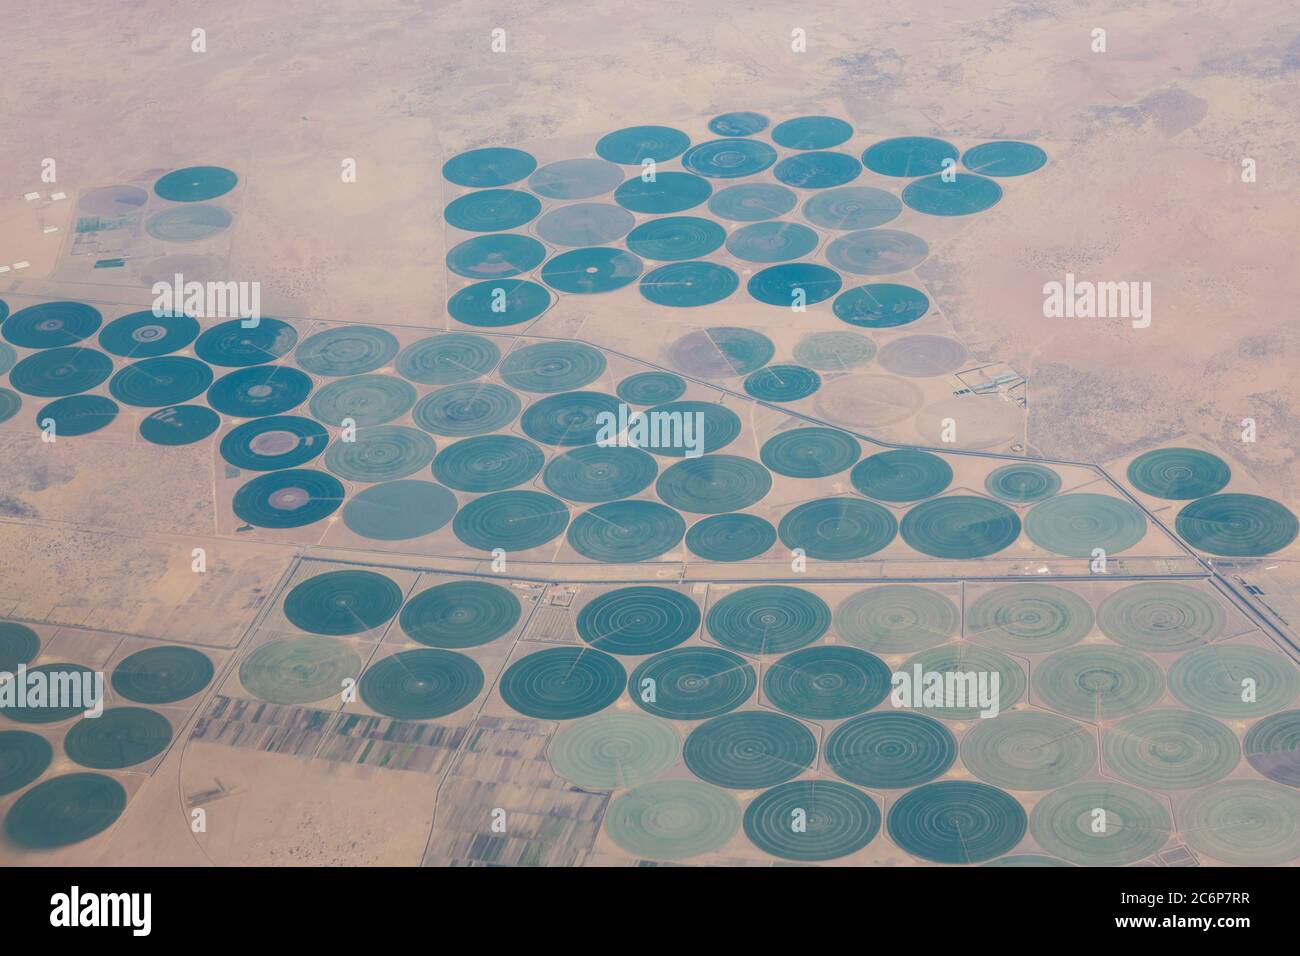 An aerial view of Sudanese agriculture and irrigation systems Stock Photo